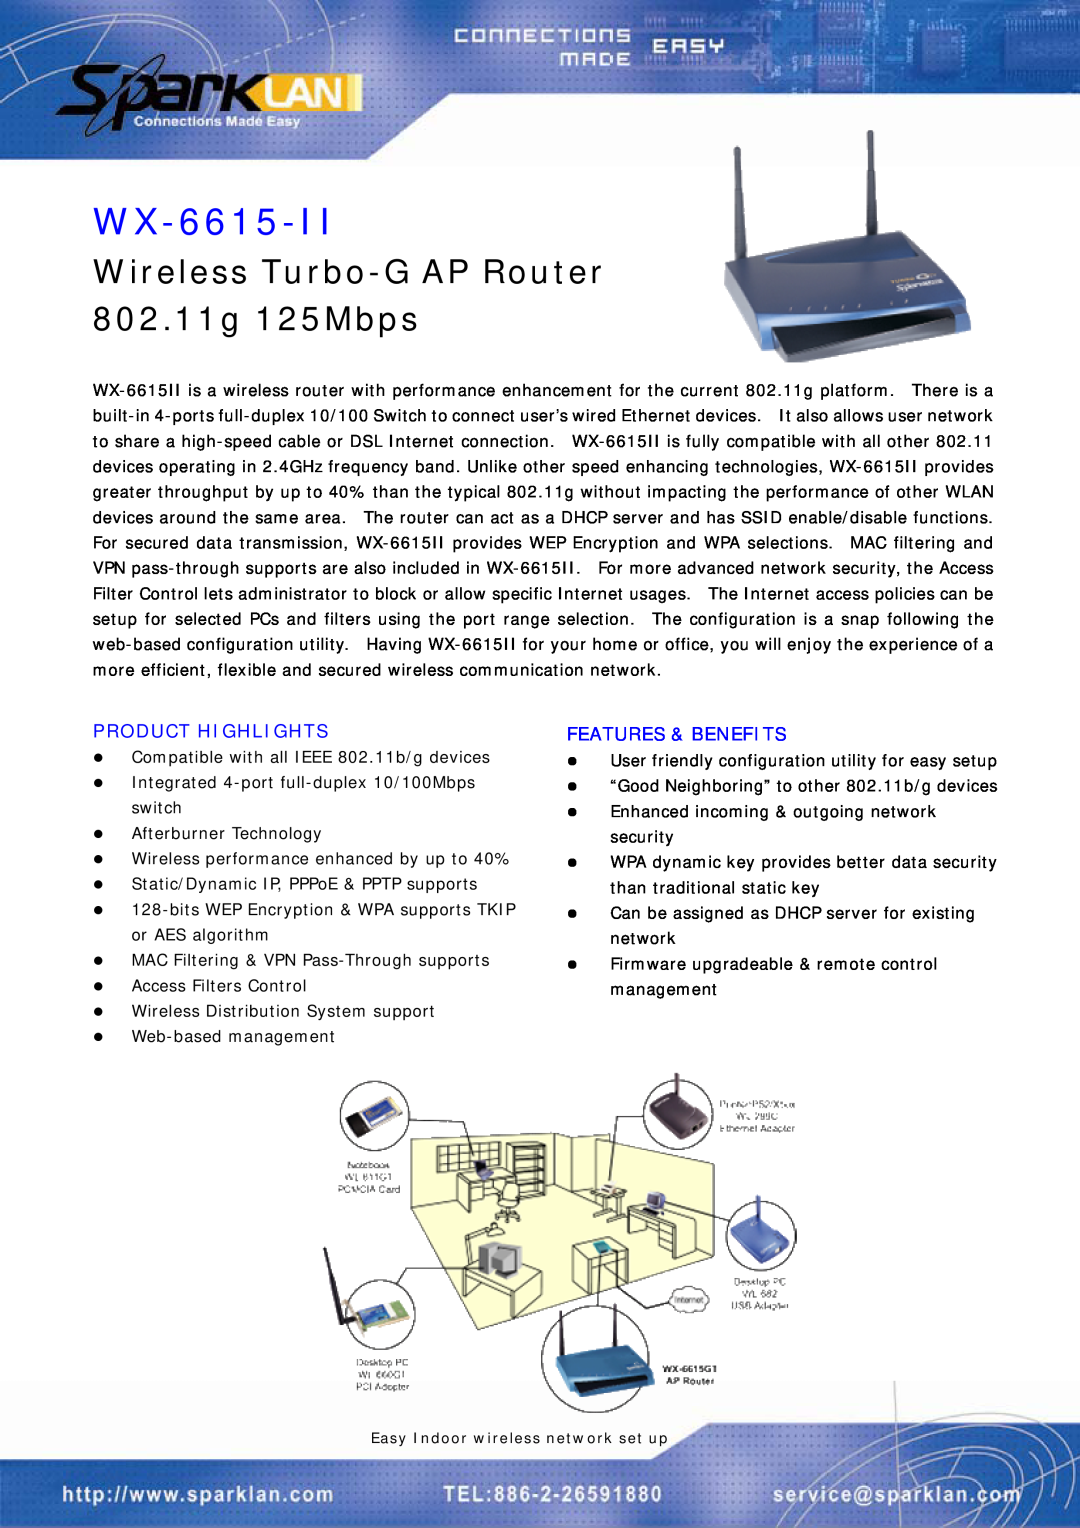 Spark Tech WX-6615-II manual Product Highlights, Features & Benefits, Wireless Turbo-G AP Router 802.11g 125Mbps 